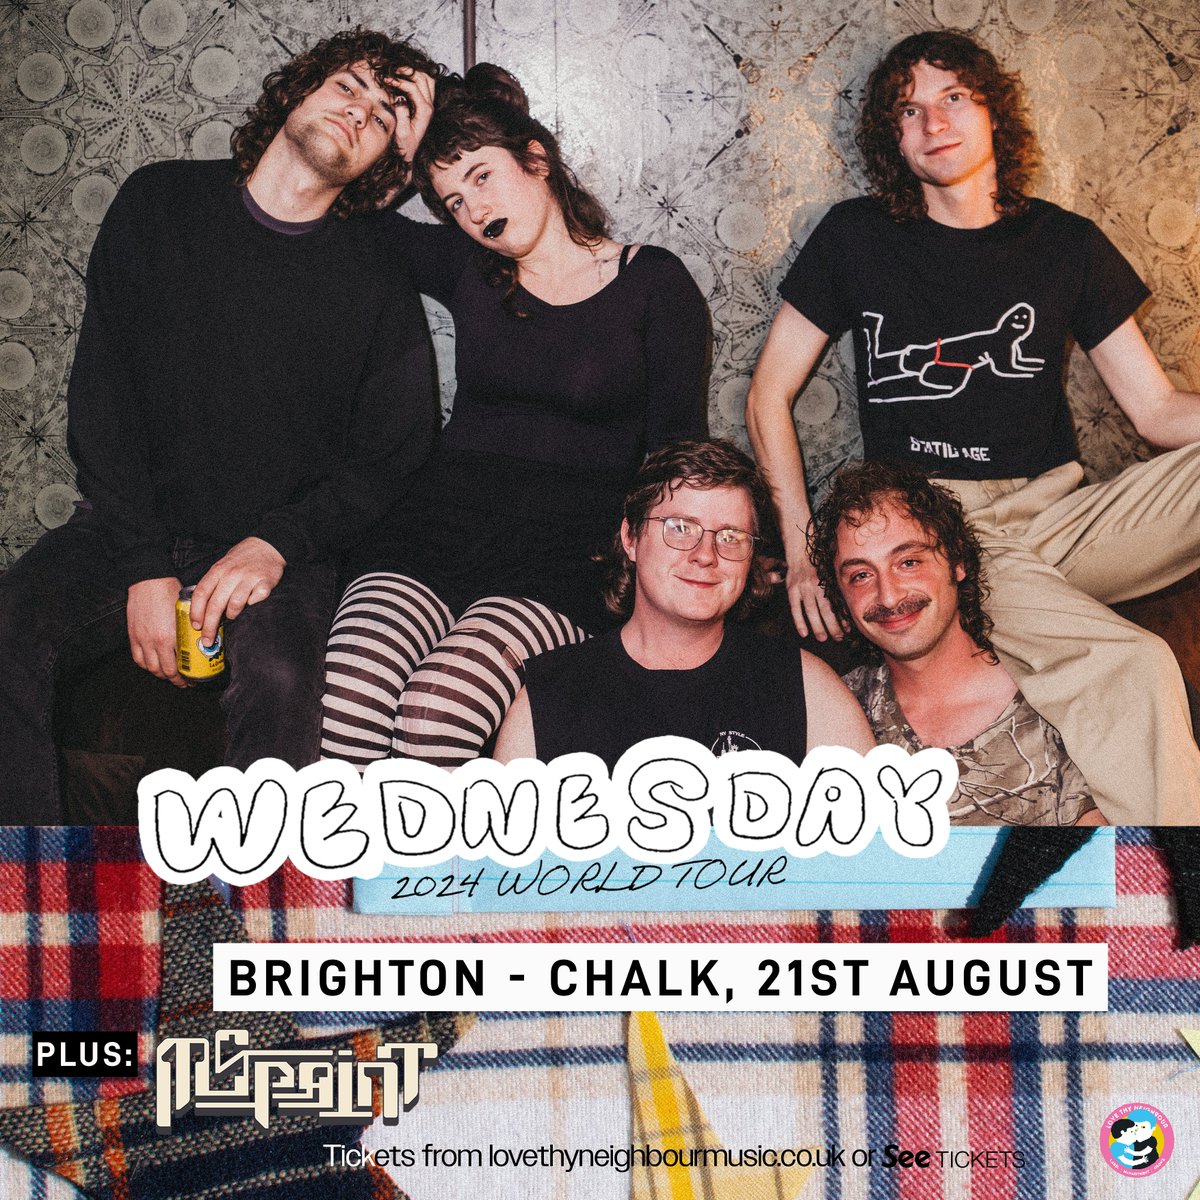 🎨Support announce!🎨 @mspaintms support @Wednesday_Band_! 'They hone a sound characterized by unlikely combinations: frenzied rhythms & tranquil synths, blistering riffs & hopeful lyrics' @pitchfork 🏛 @chalkvenue 🎫 Selling fast already! Get yours from @seetickets / our site